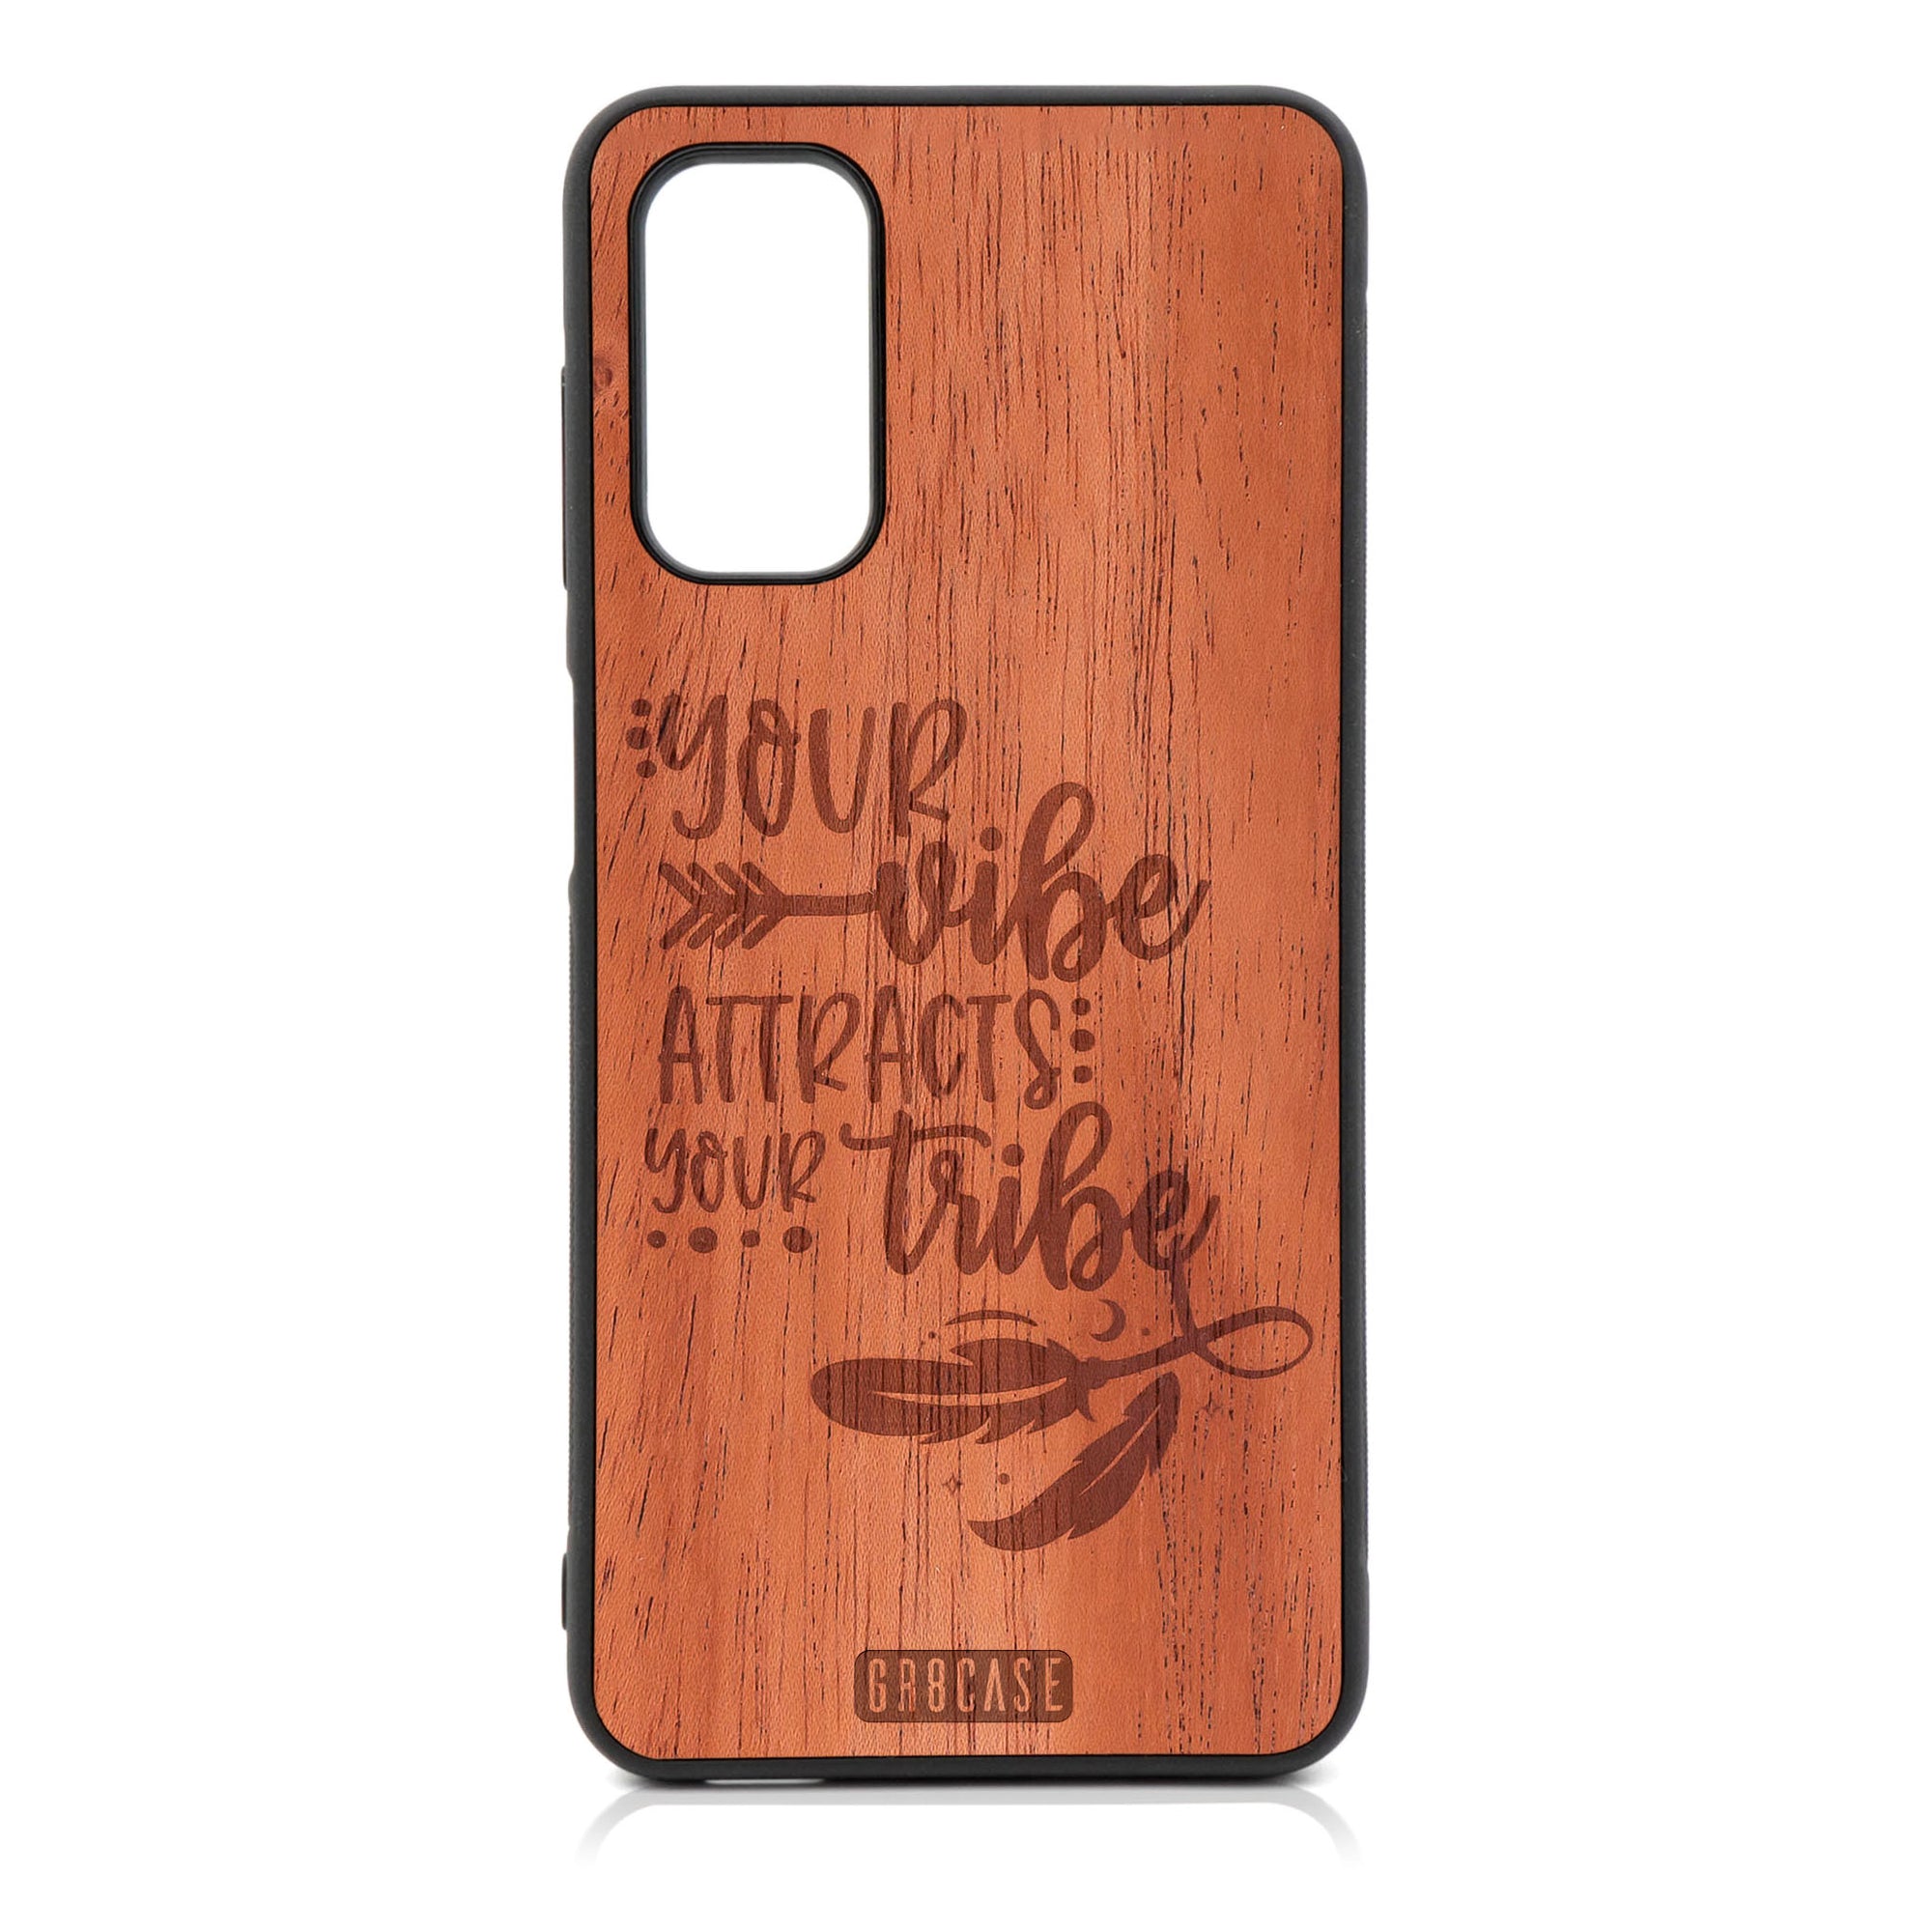 Your Vibe Attracts Your Tribe Design Wood Case For Galaxy A13 5G